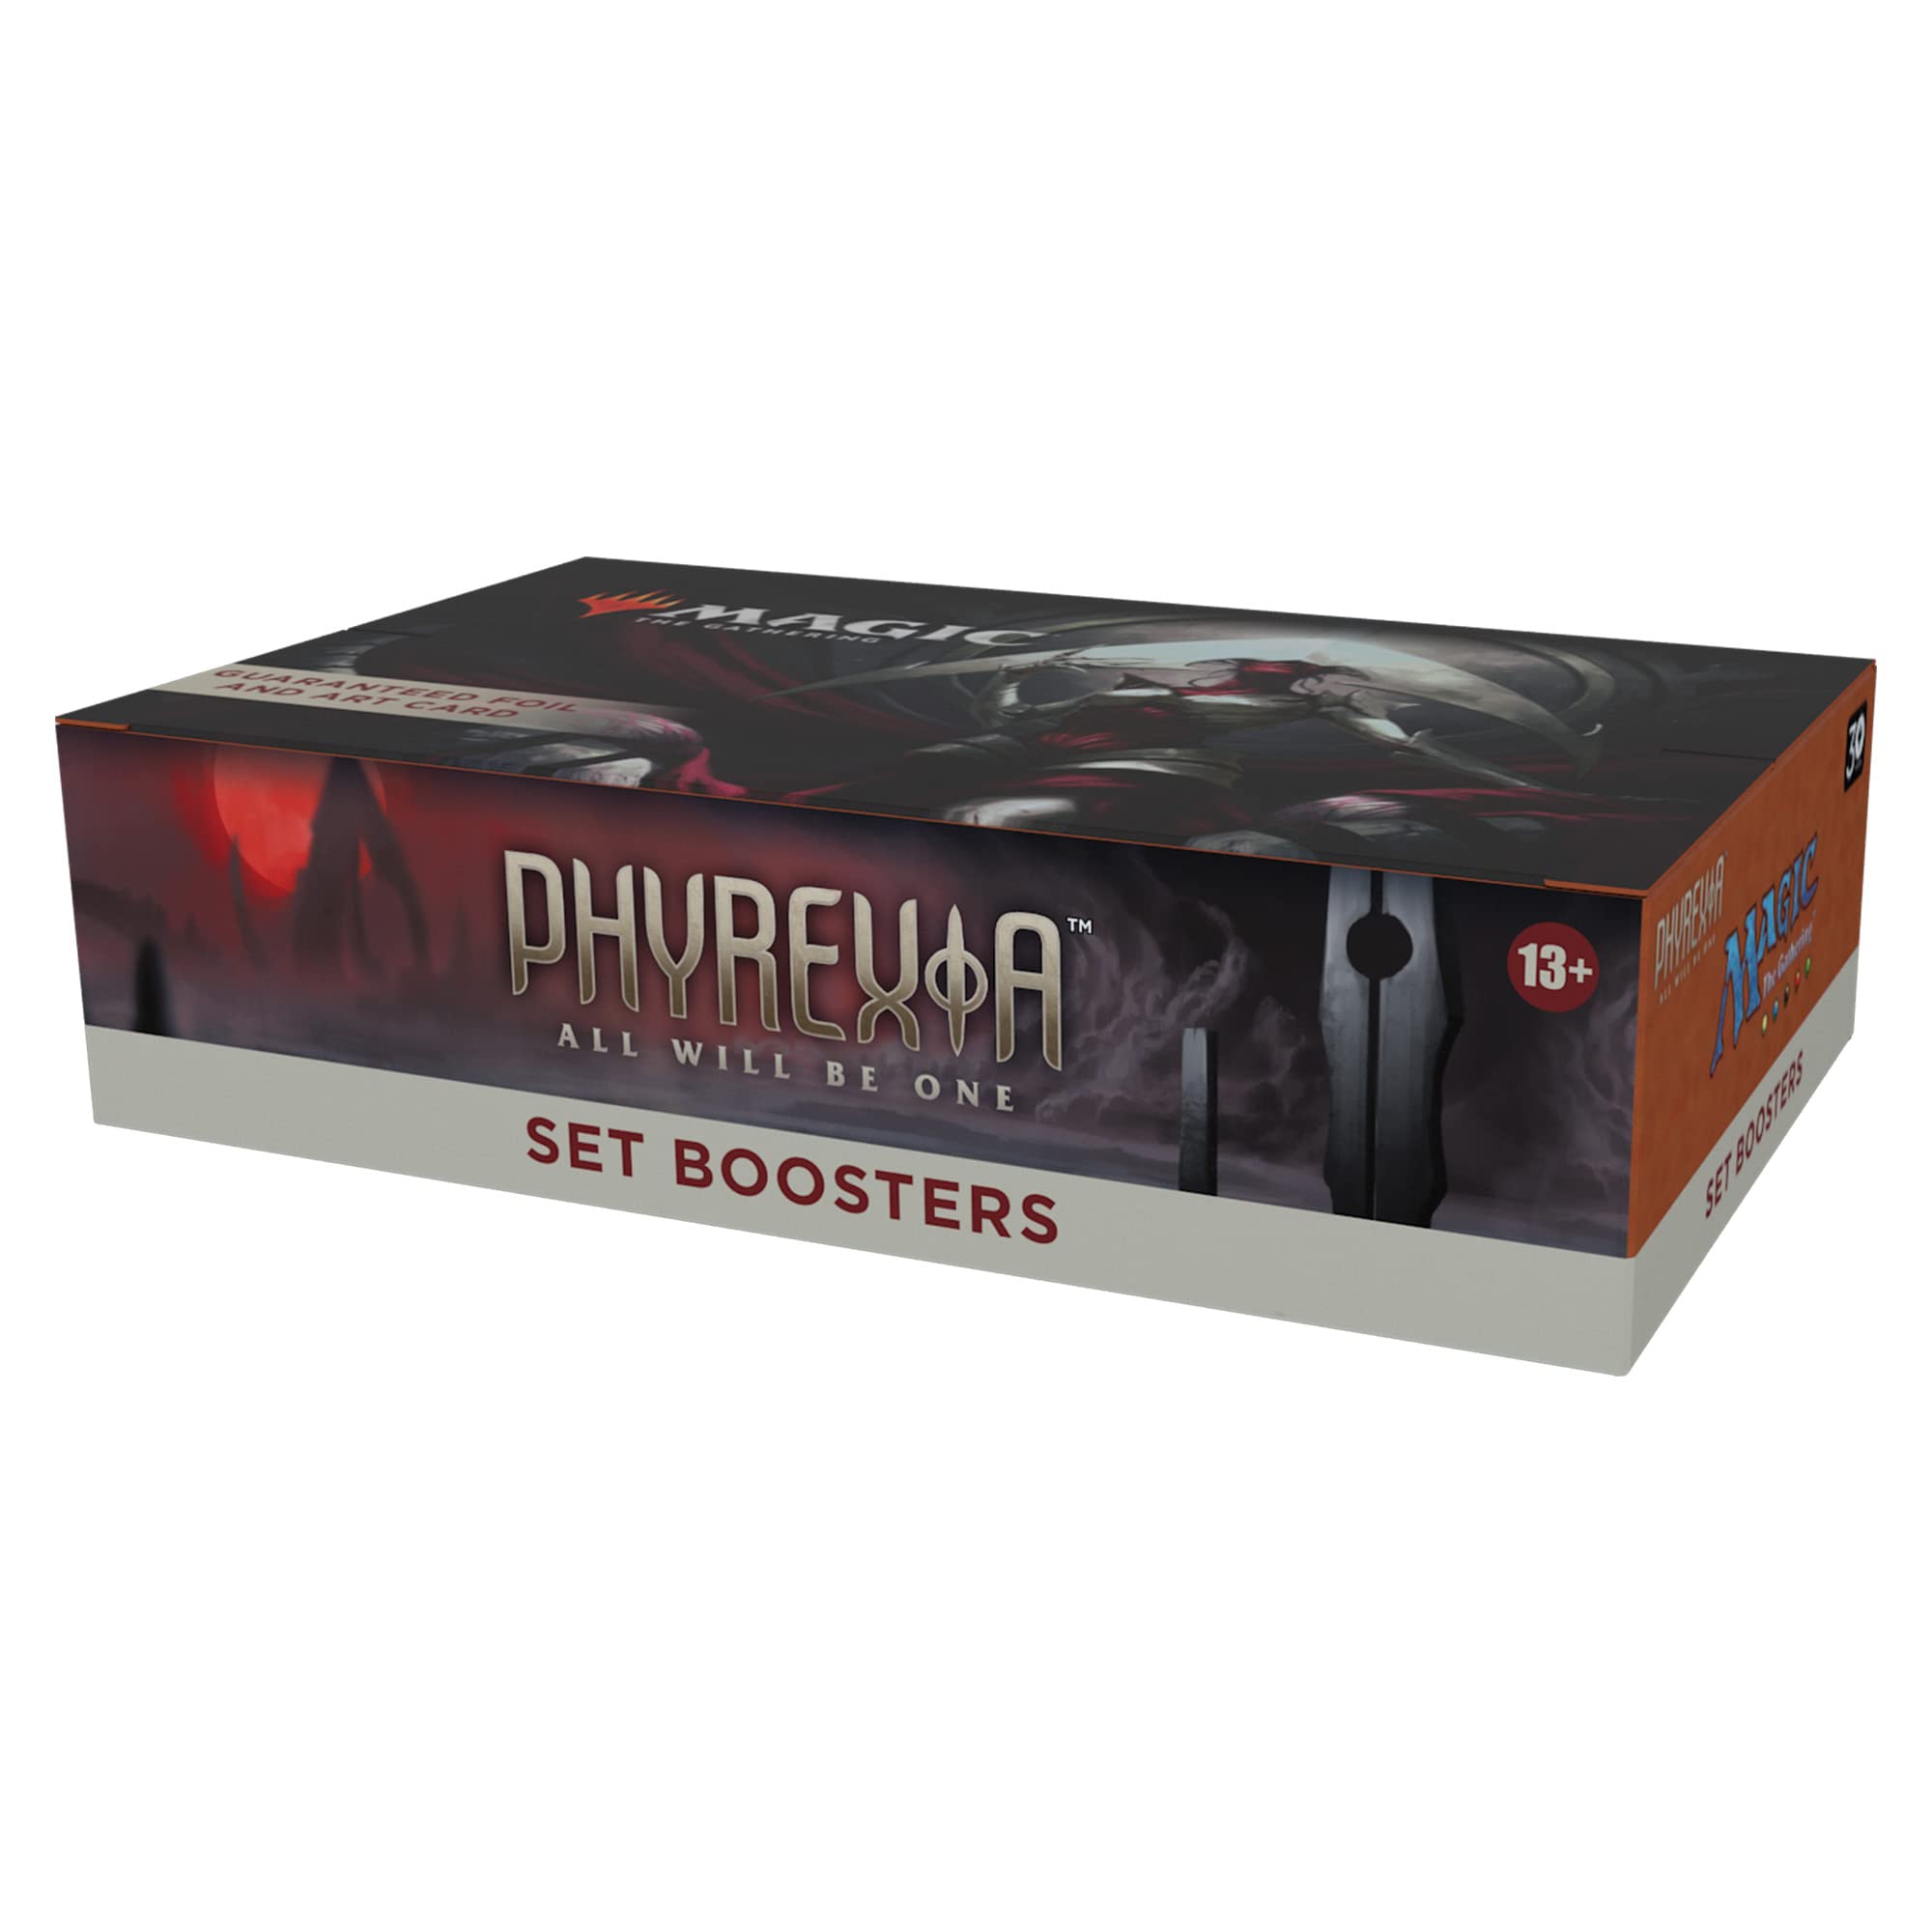 Magic: The Gathering Phyrexia: All Will Be One Set Booster Box | 30 Packs (360 Magic Cards)